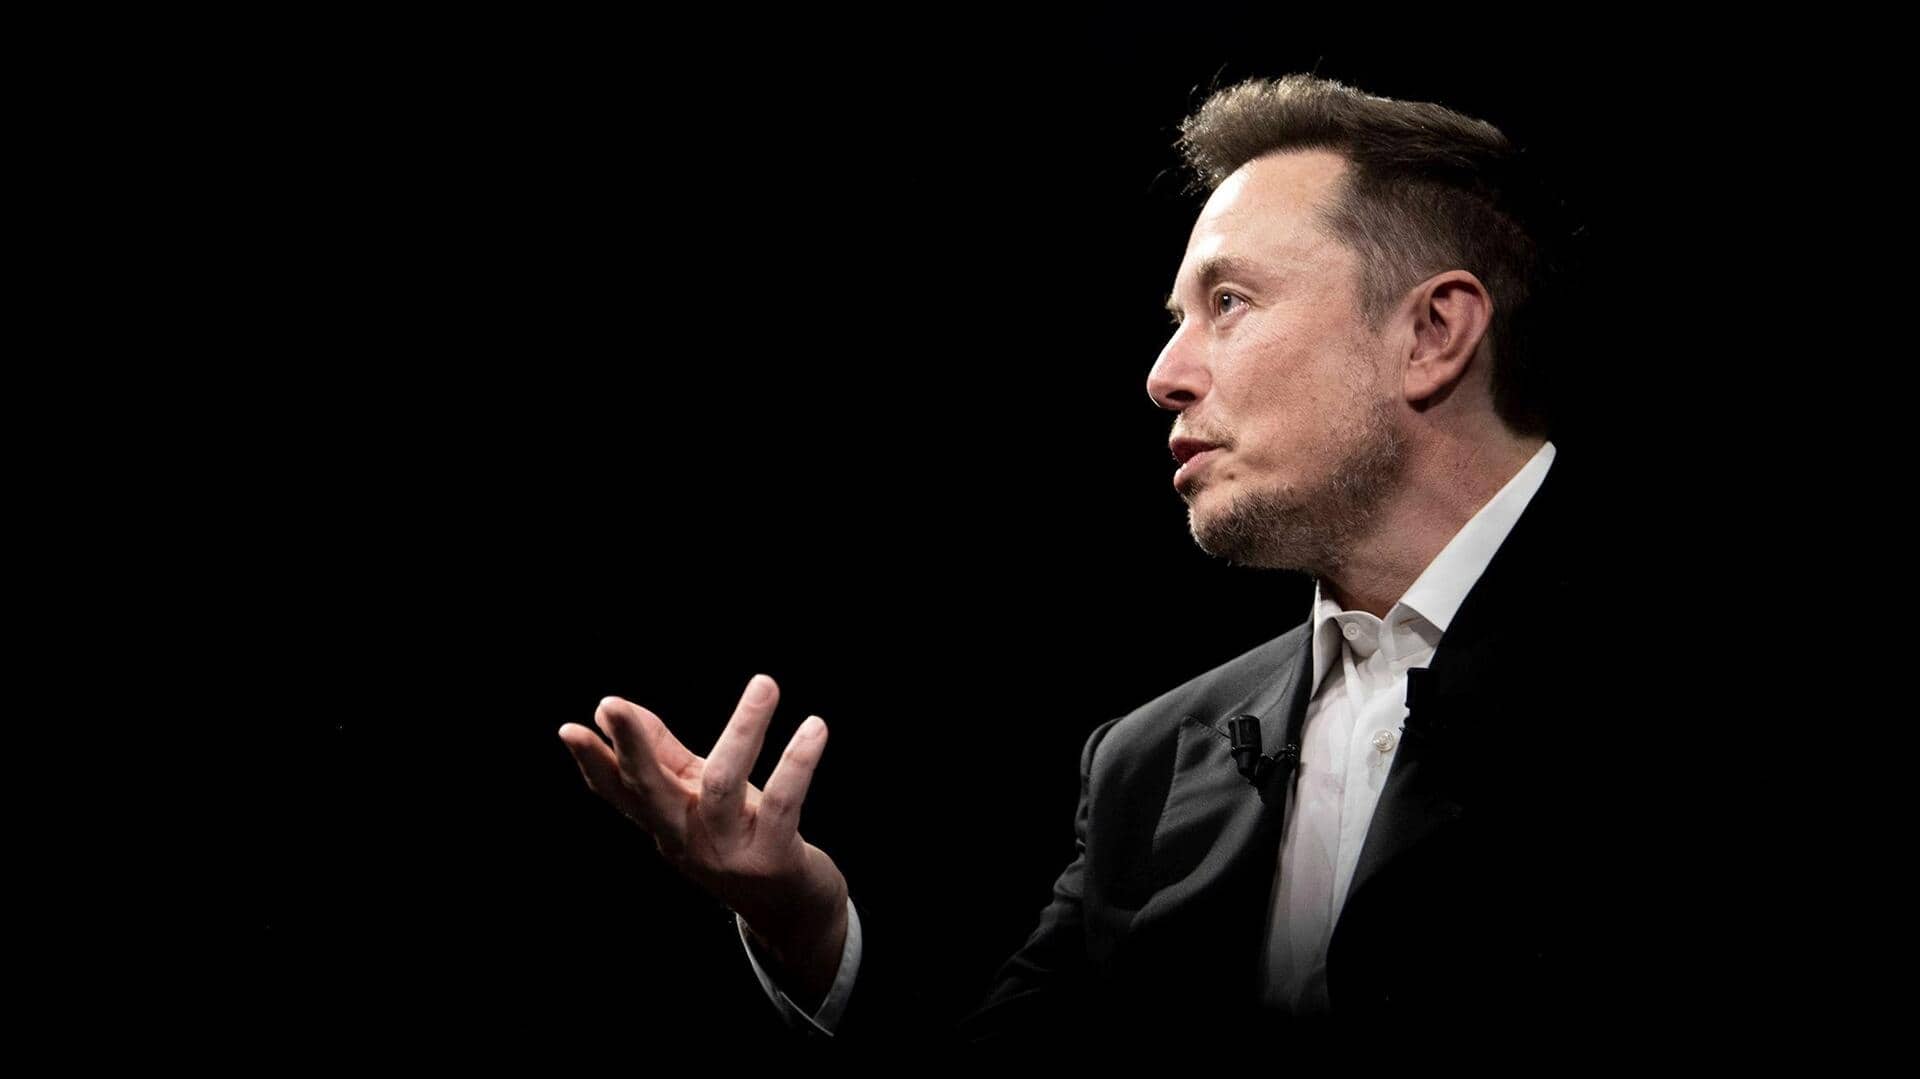 After Elon Musk's 'F' word outburst, what's next for X?